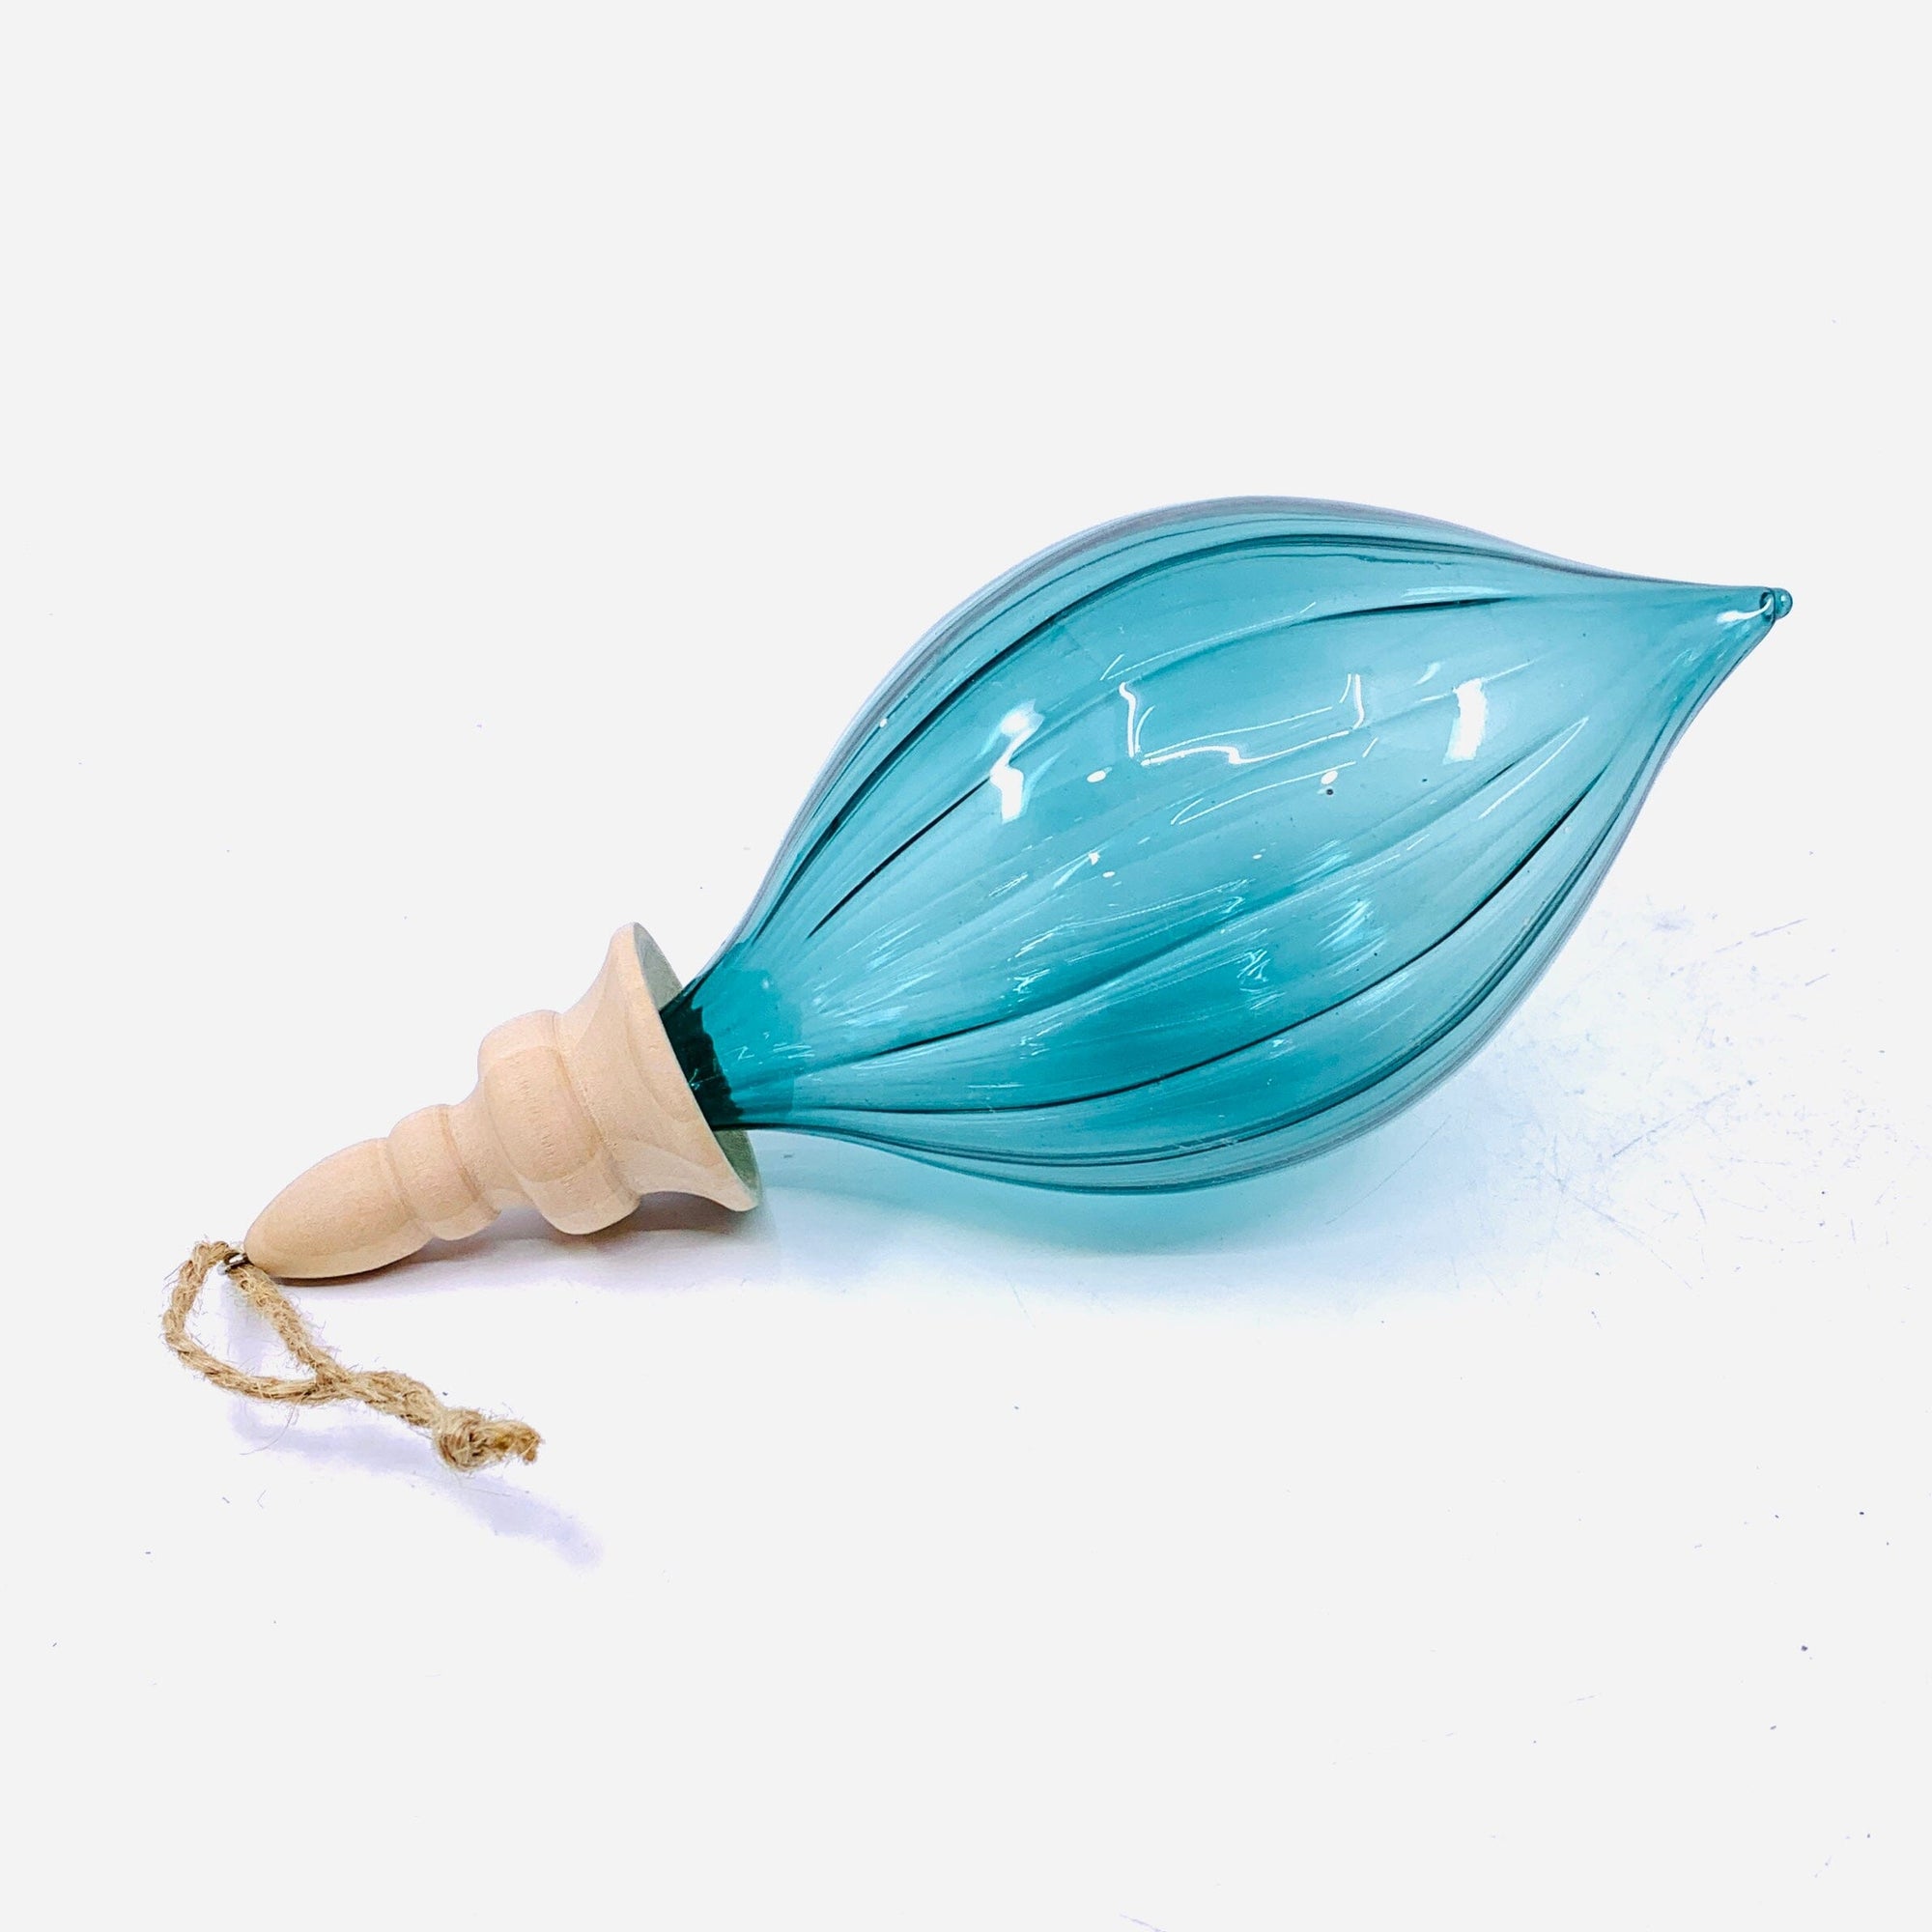 Wooden Spindle Glass Finial Ornament 23, Teal GANZ 